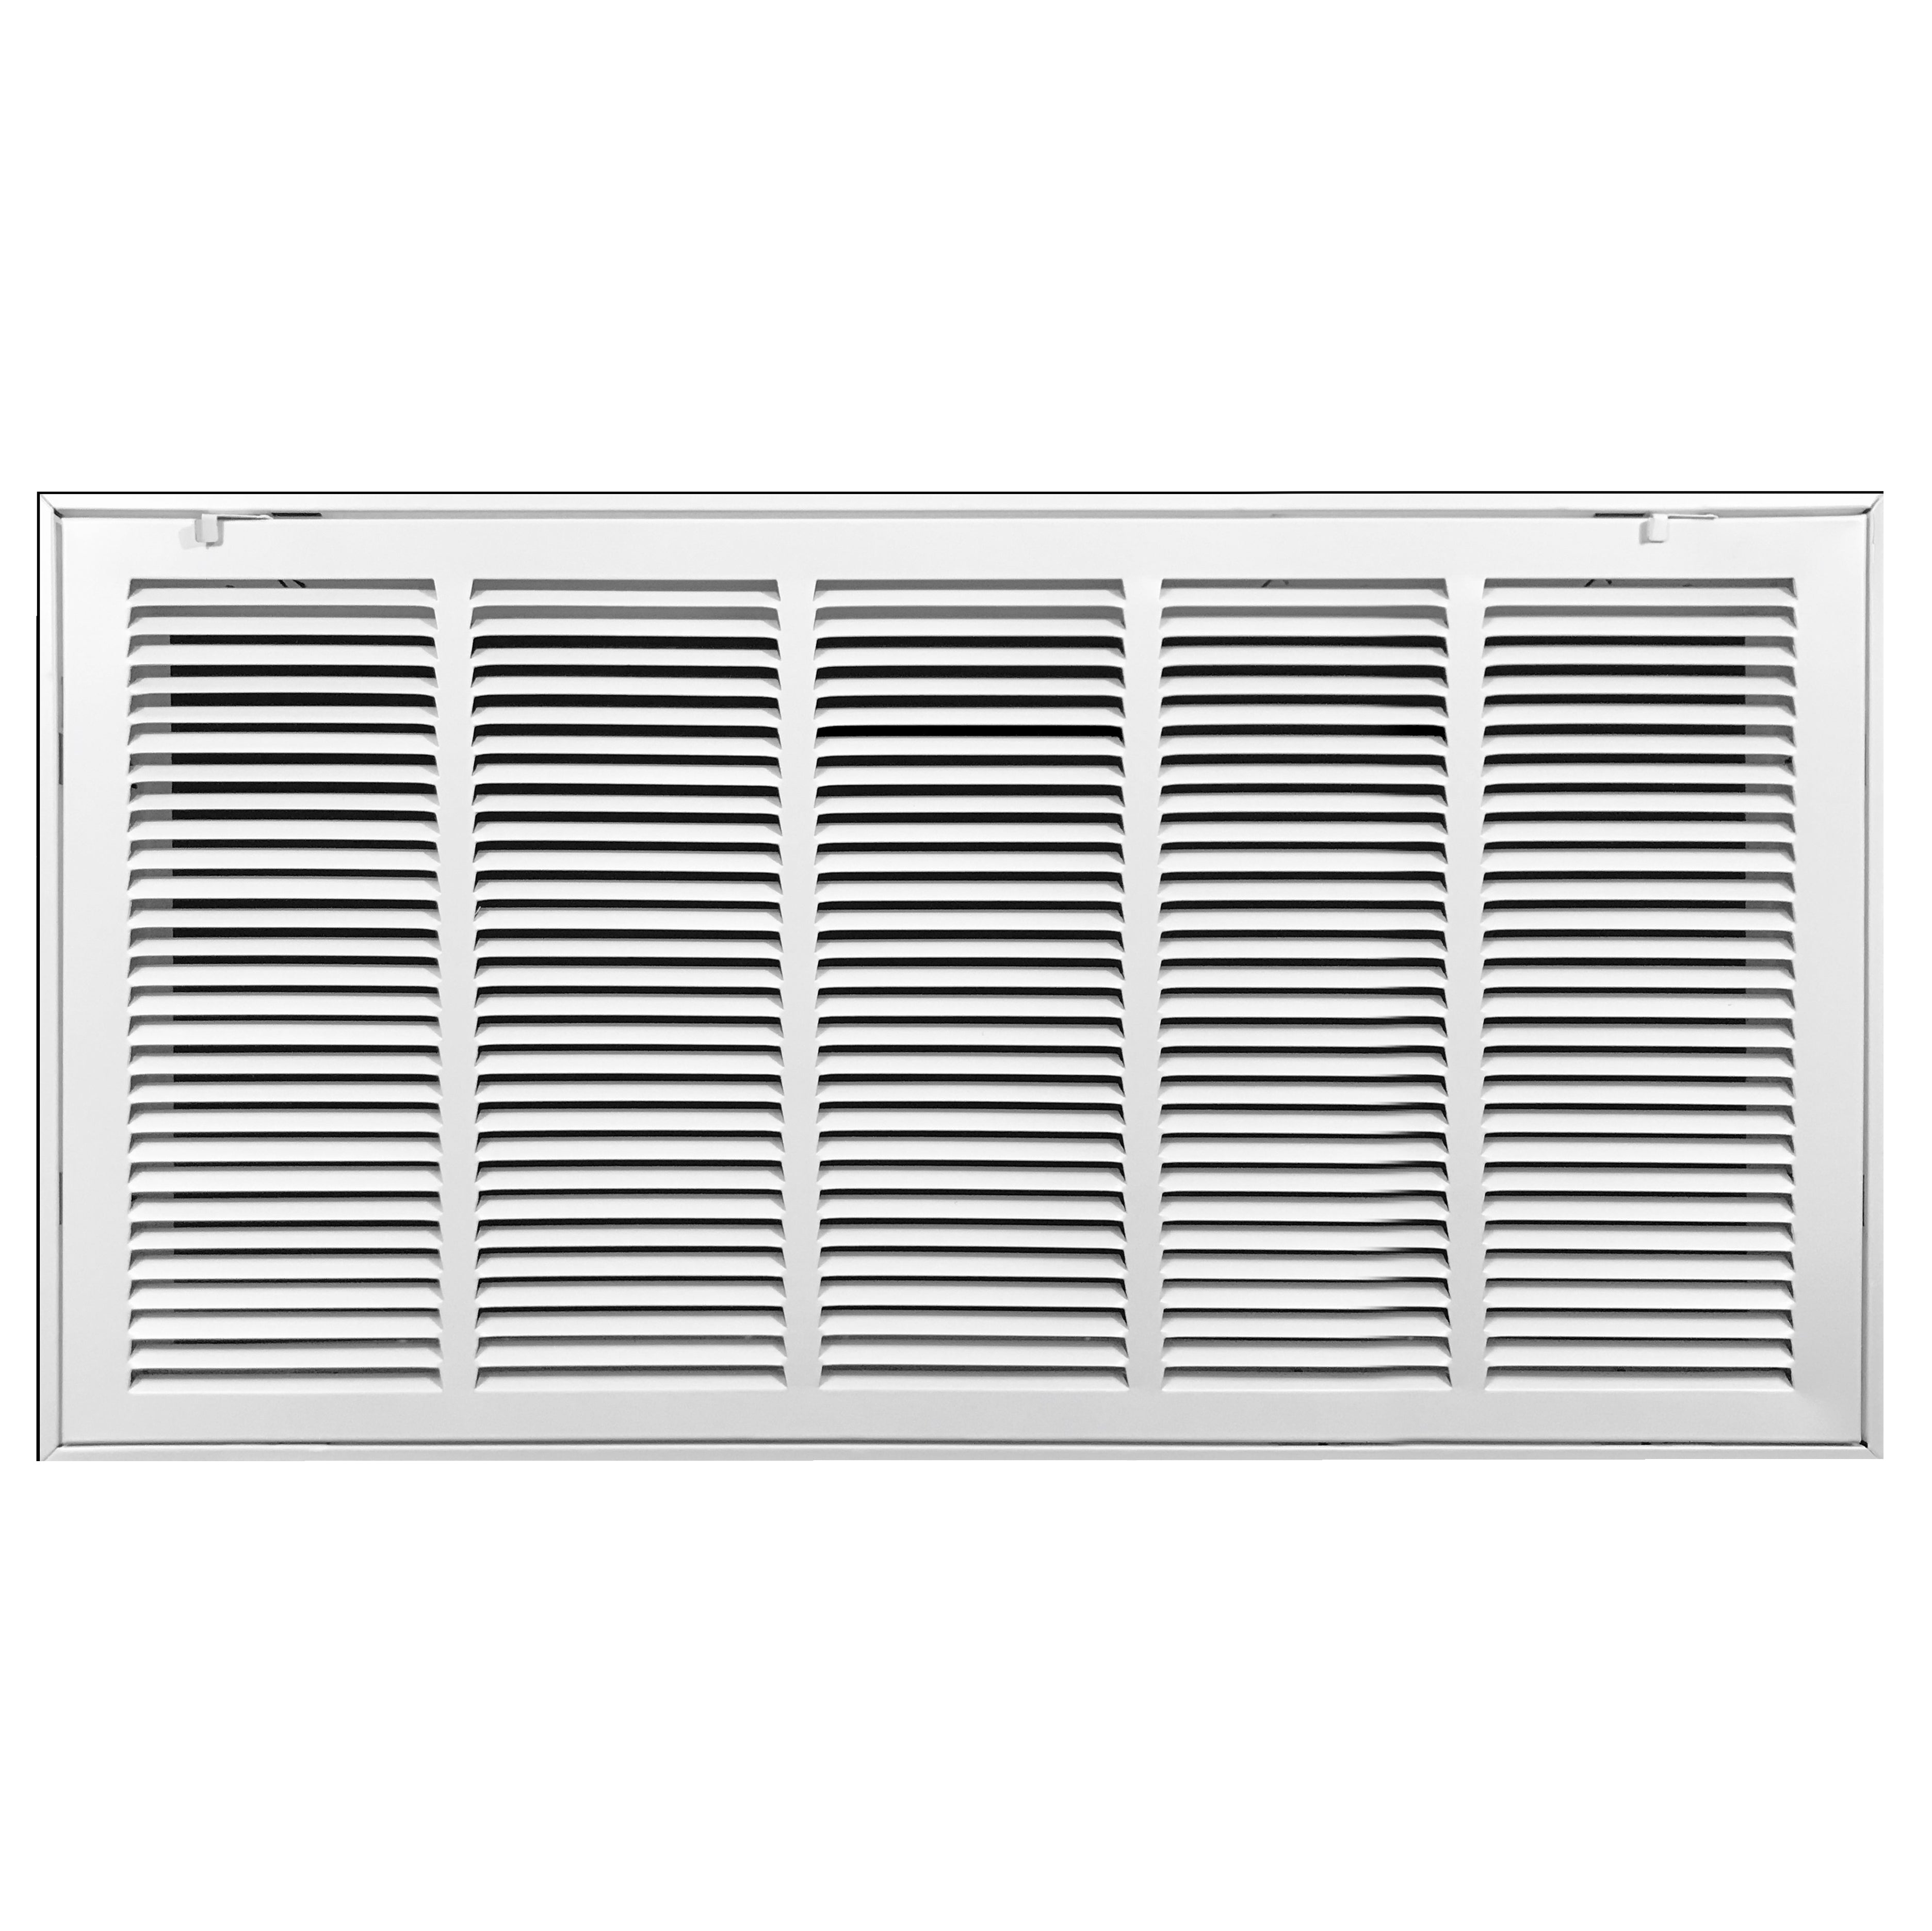 airgrilles 25" x 20" duct opening   steel return air filter grille for sidewall and ceiling hnd-rafg1-wh-25x20 b087gg212k - 1